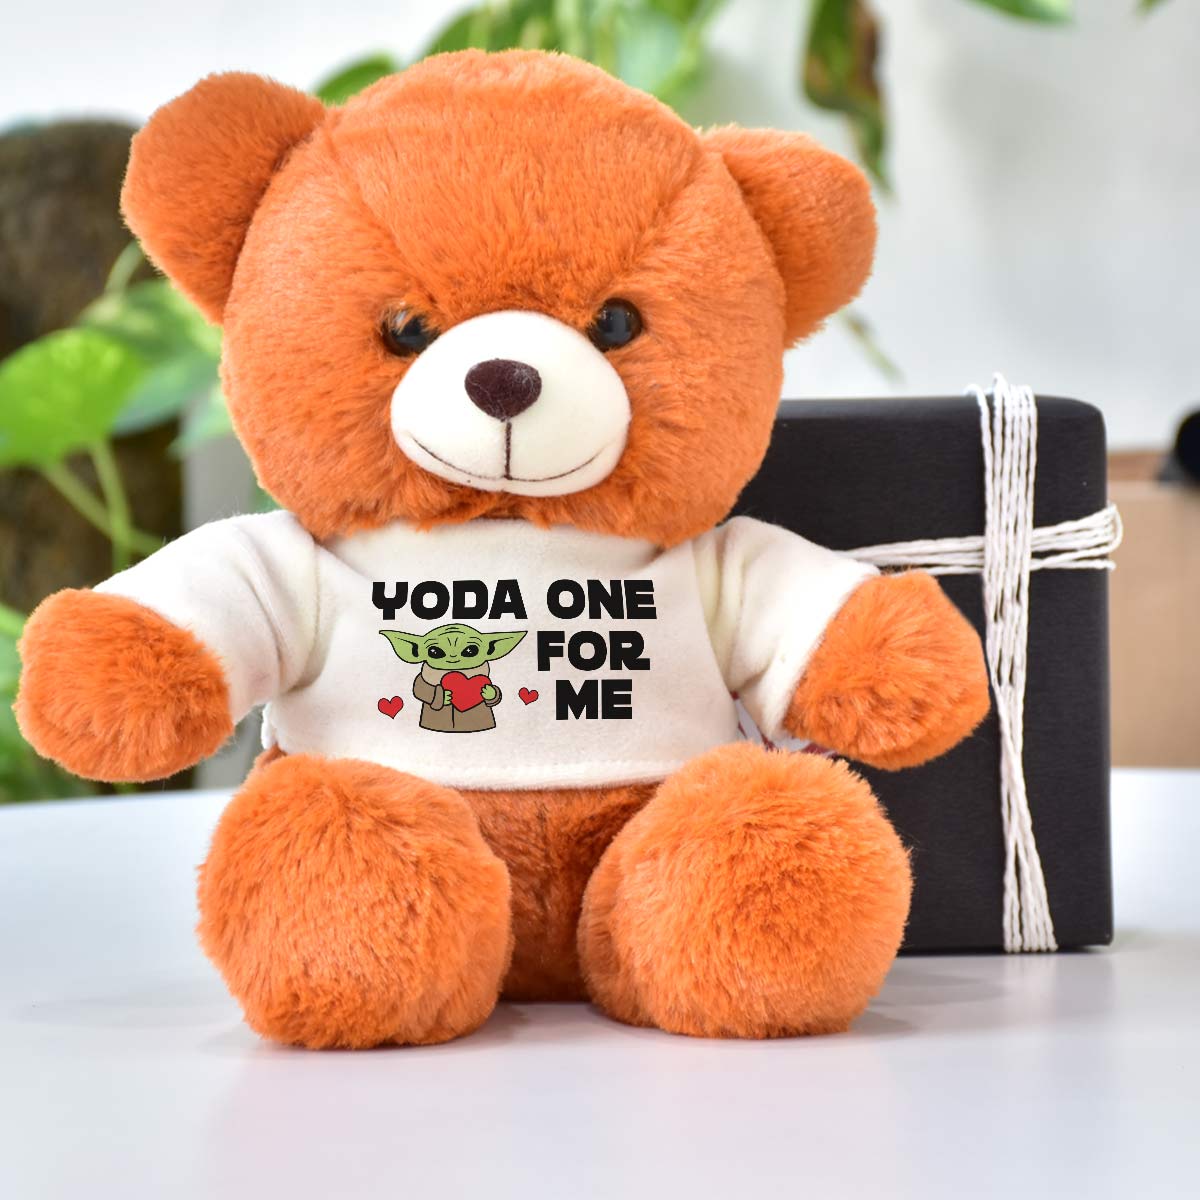 Yoda the one for me T-Shirt Teddy